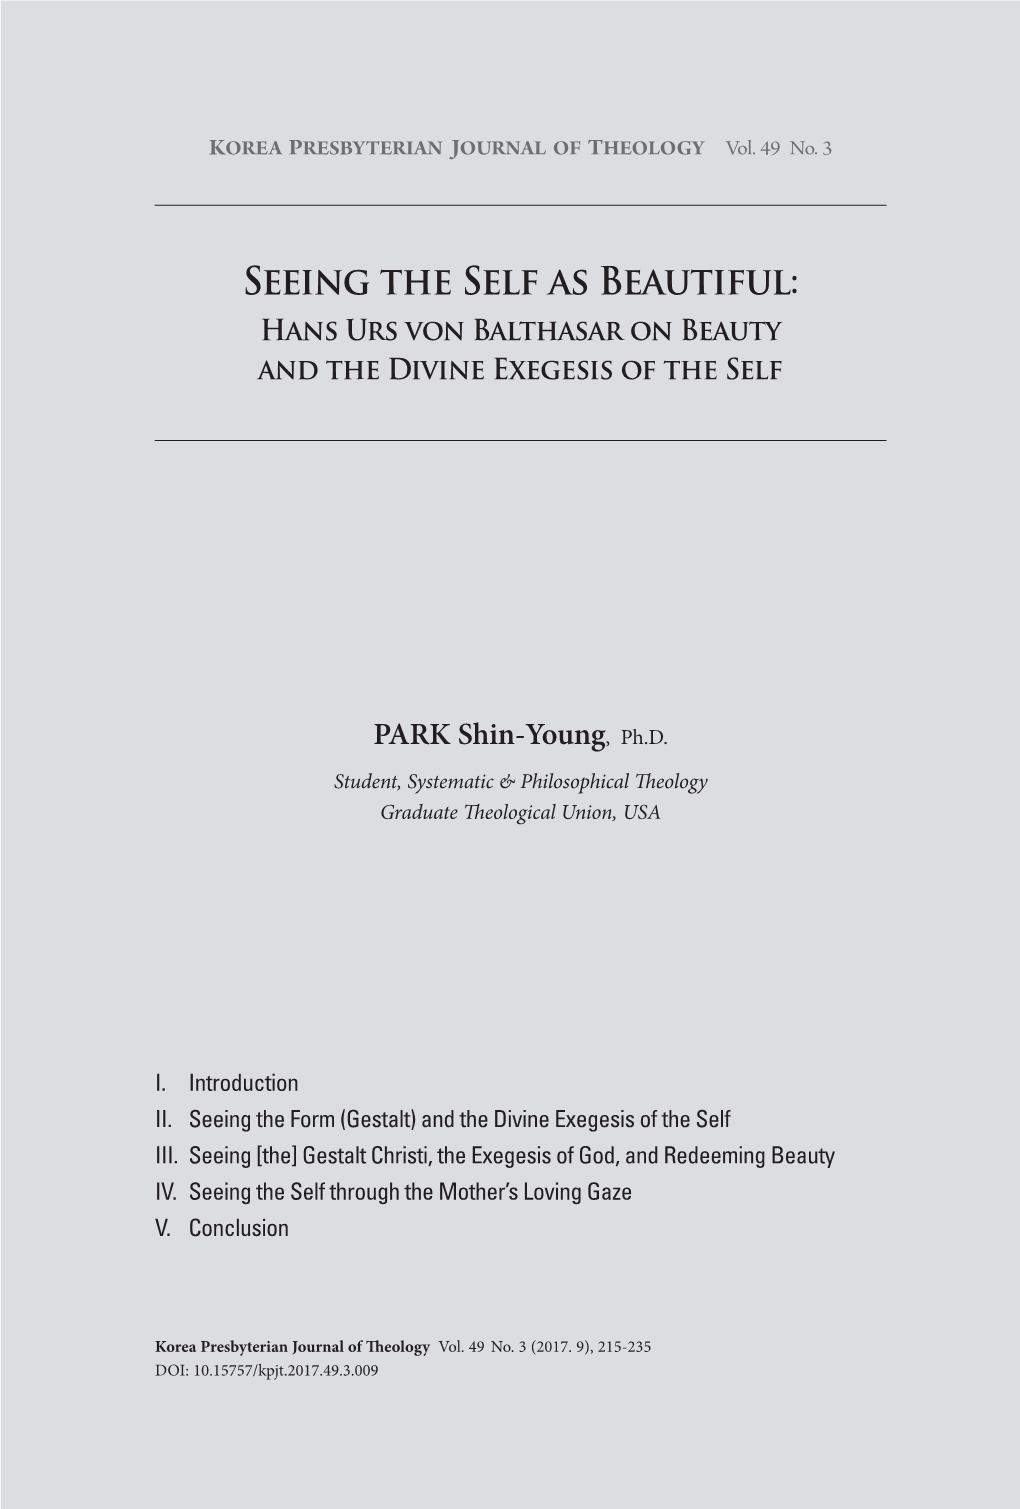 Seeing the Self As Beautiful: Hans Urs Von Balthasar on Beauty and the Divine Exegesis of the Self